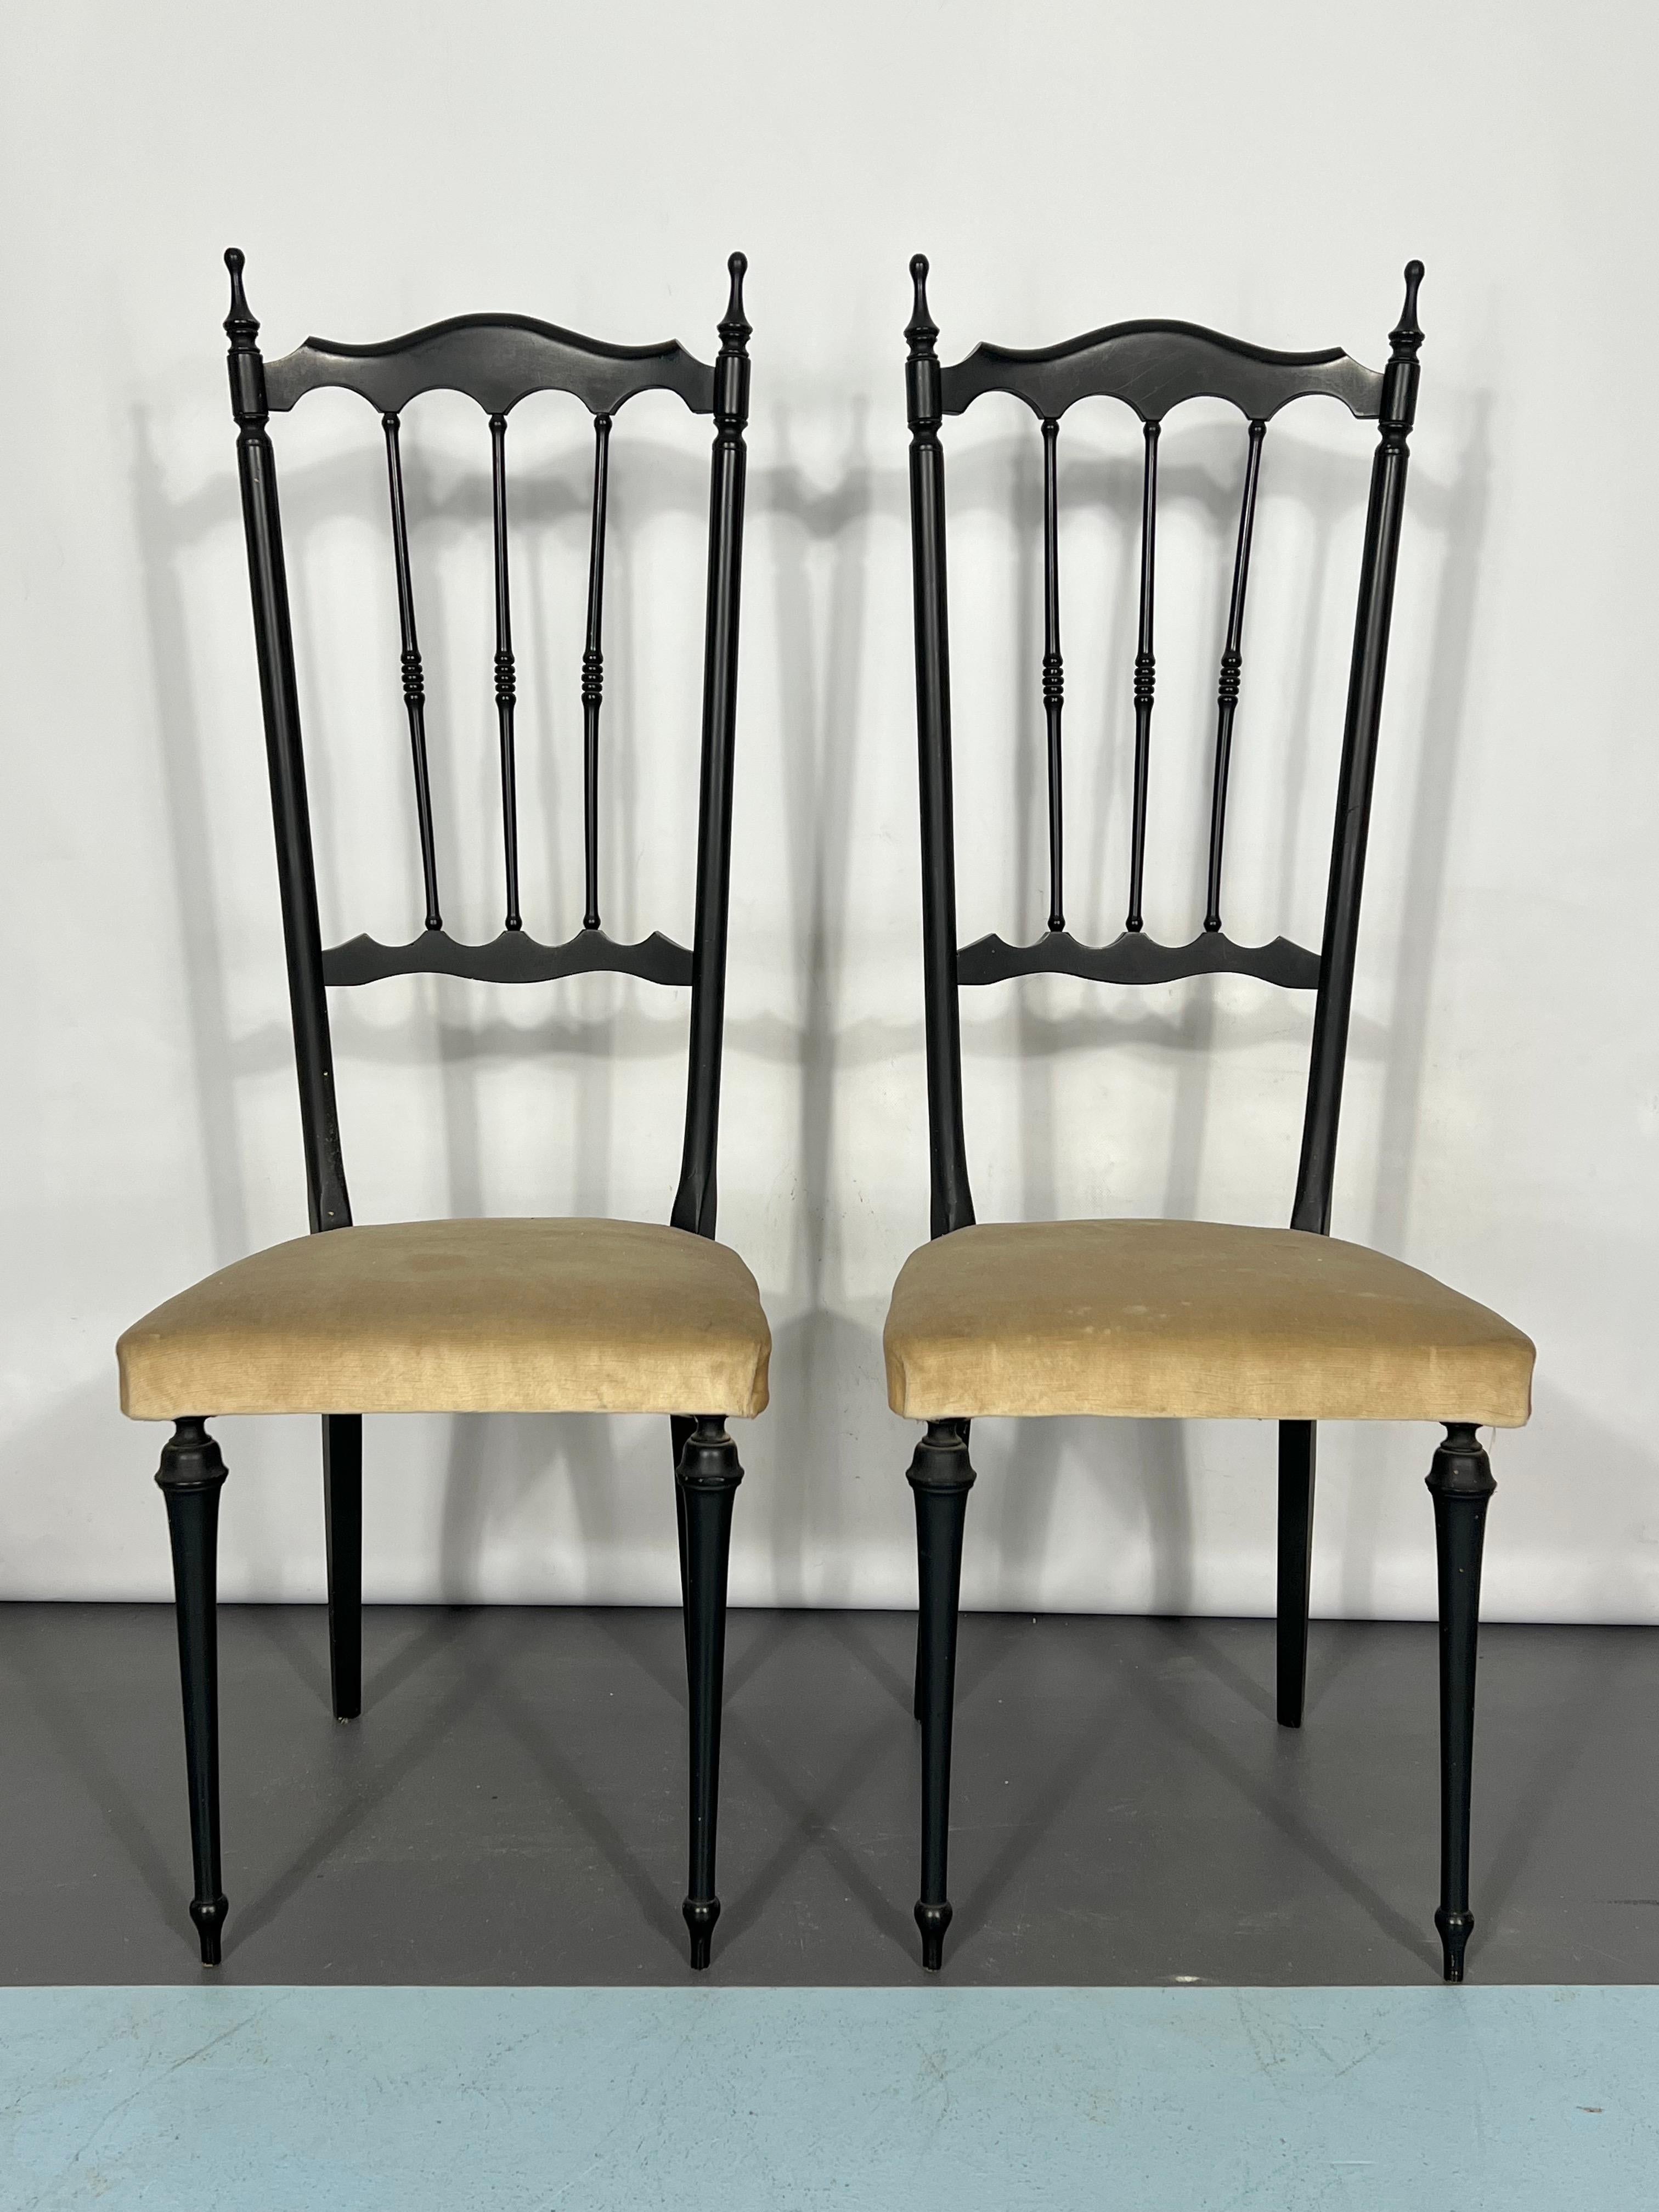 Good vintage condition with trace of age and use for this set of two side chairs by Chiavari and produced in Italy during the 50s.